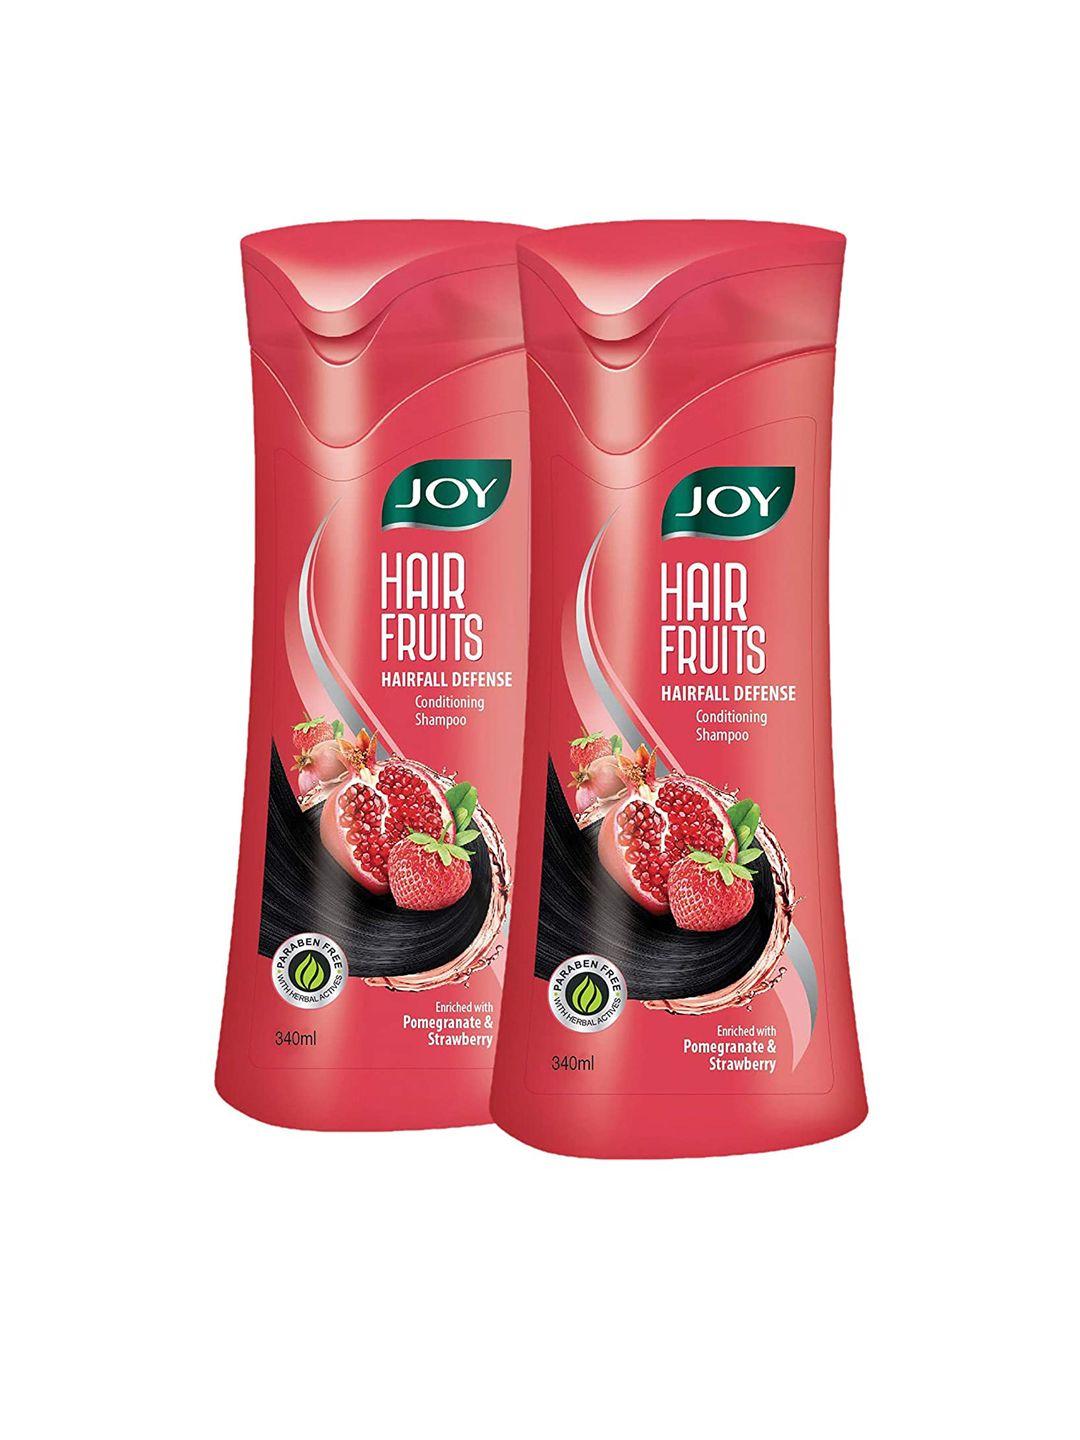 joy set of 2 hair fruits hairfall defense conditioning shampoo with strawberry- 340ml each